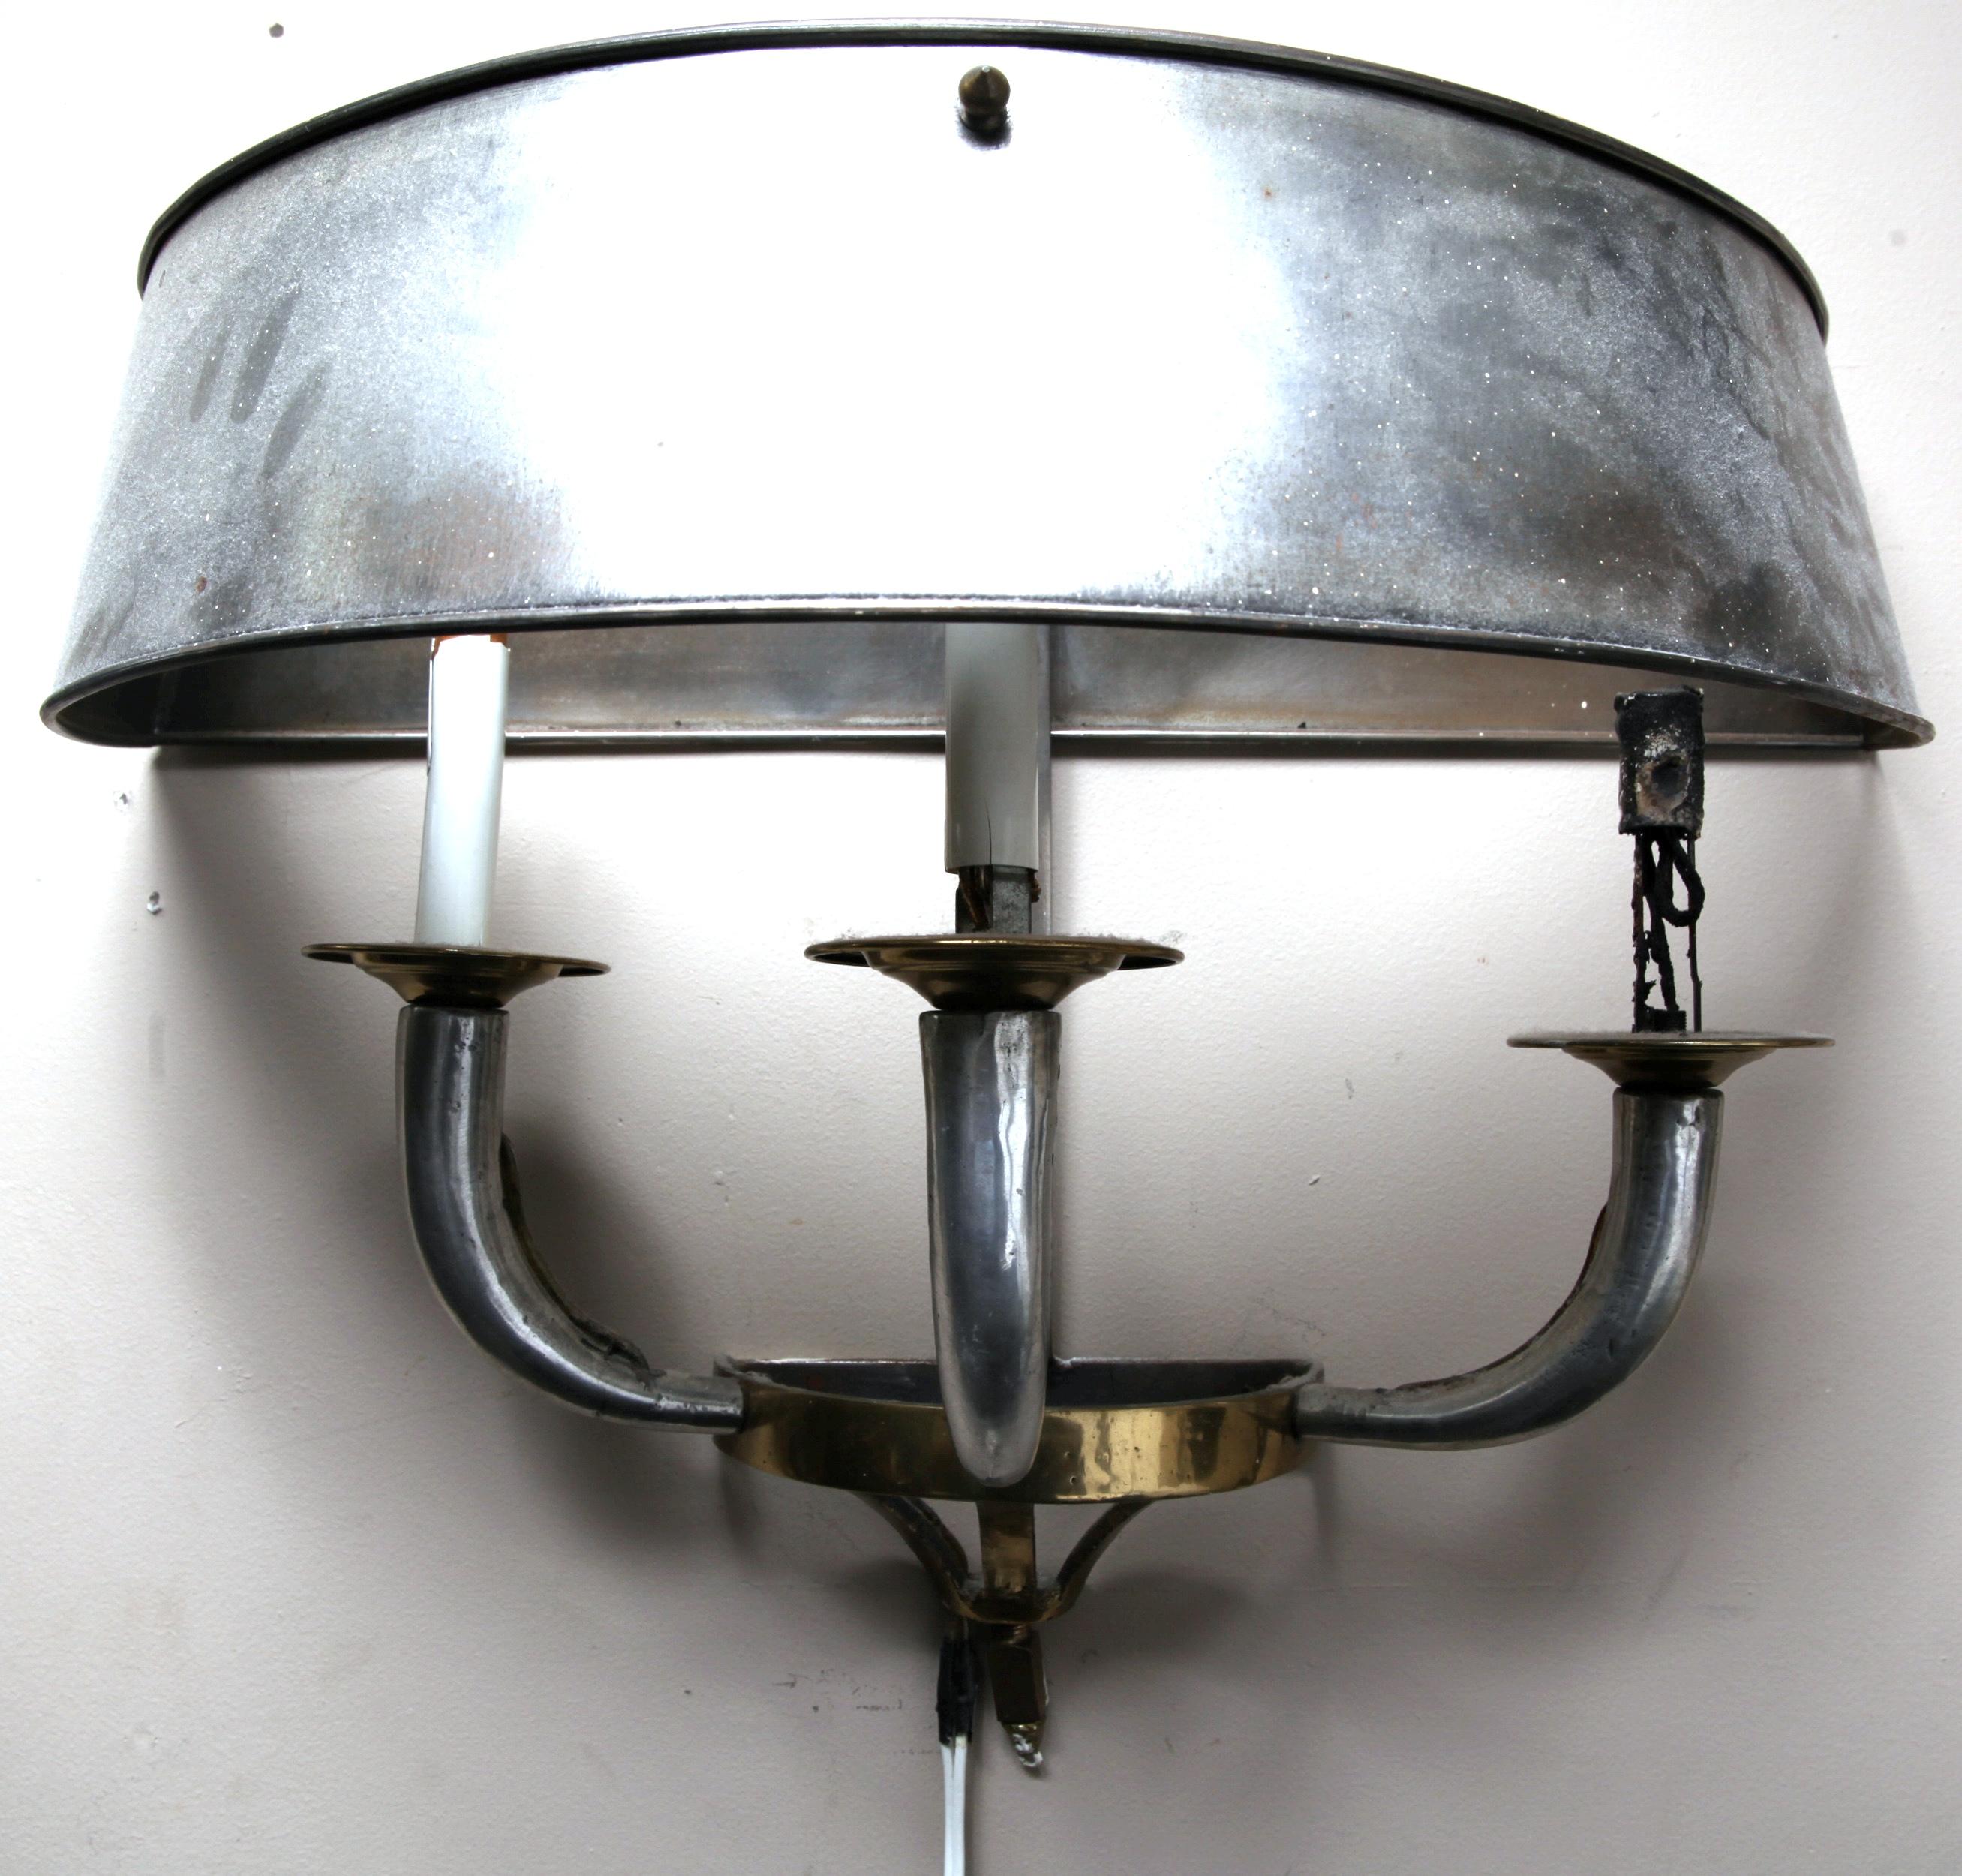 Pair of Art Deco mixed metal three light candelabra wall sconces with hemispherical metal shades. The pair is in great vintage condition with minor damages throughout.